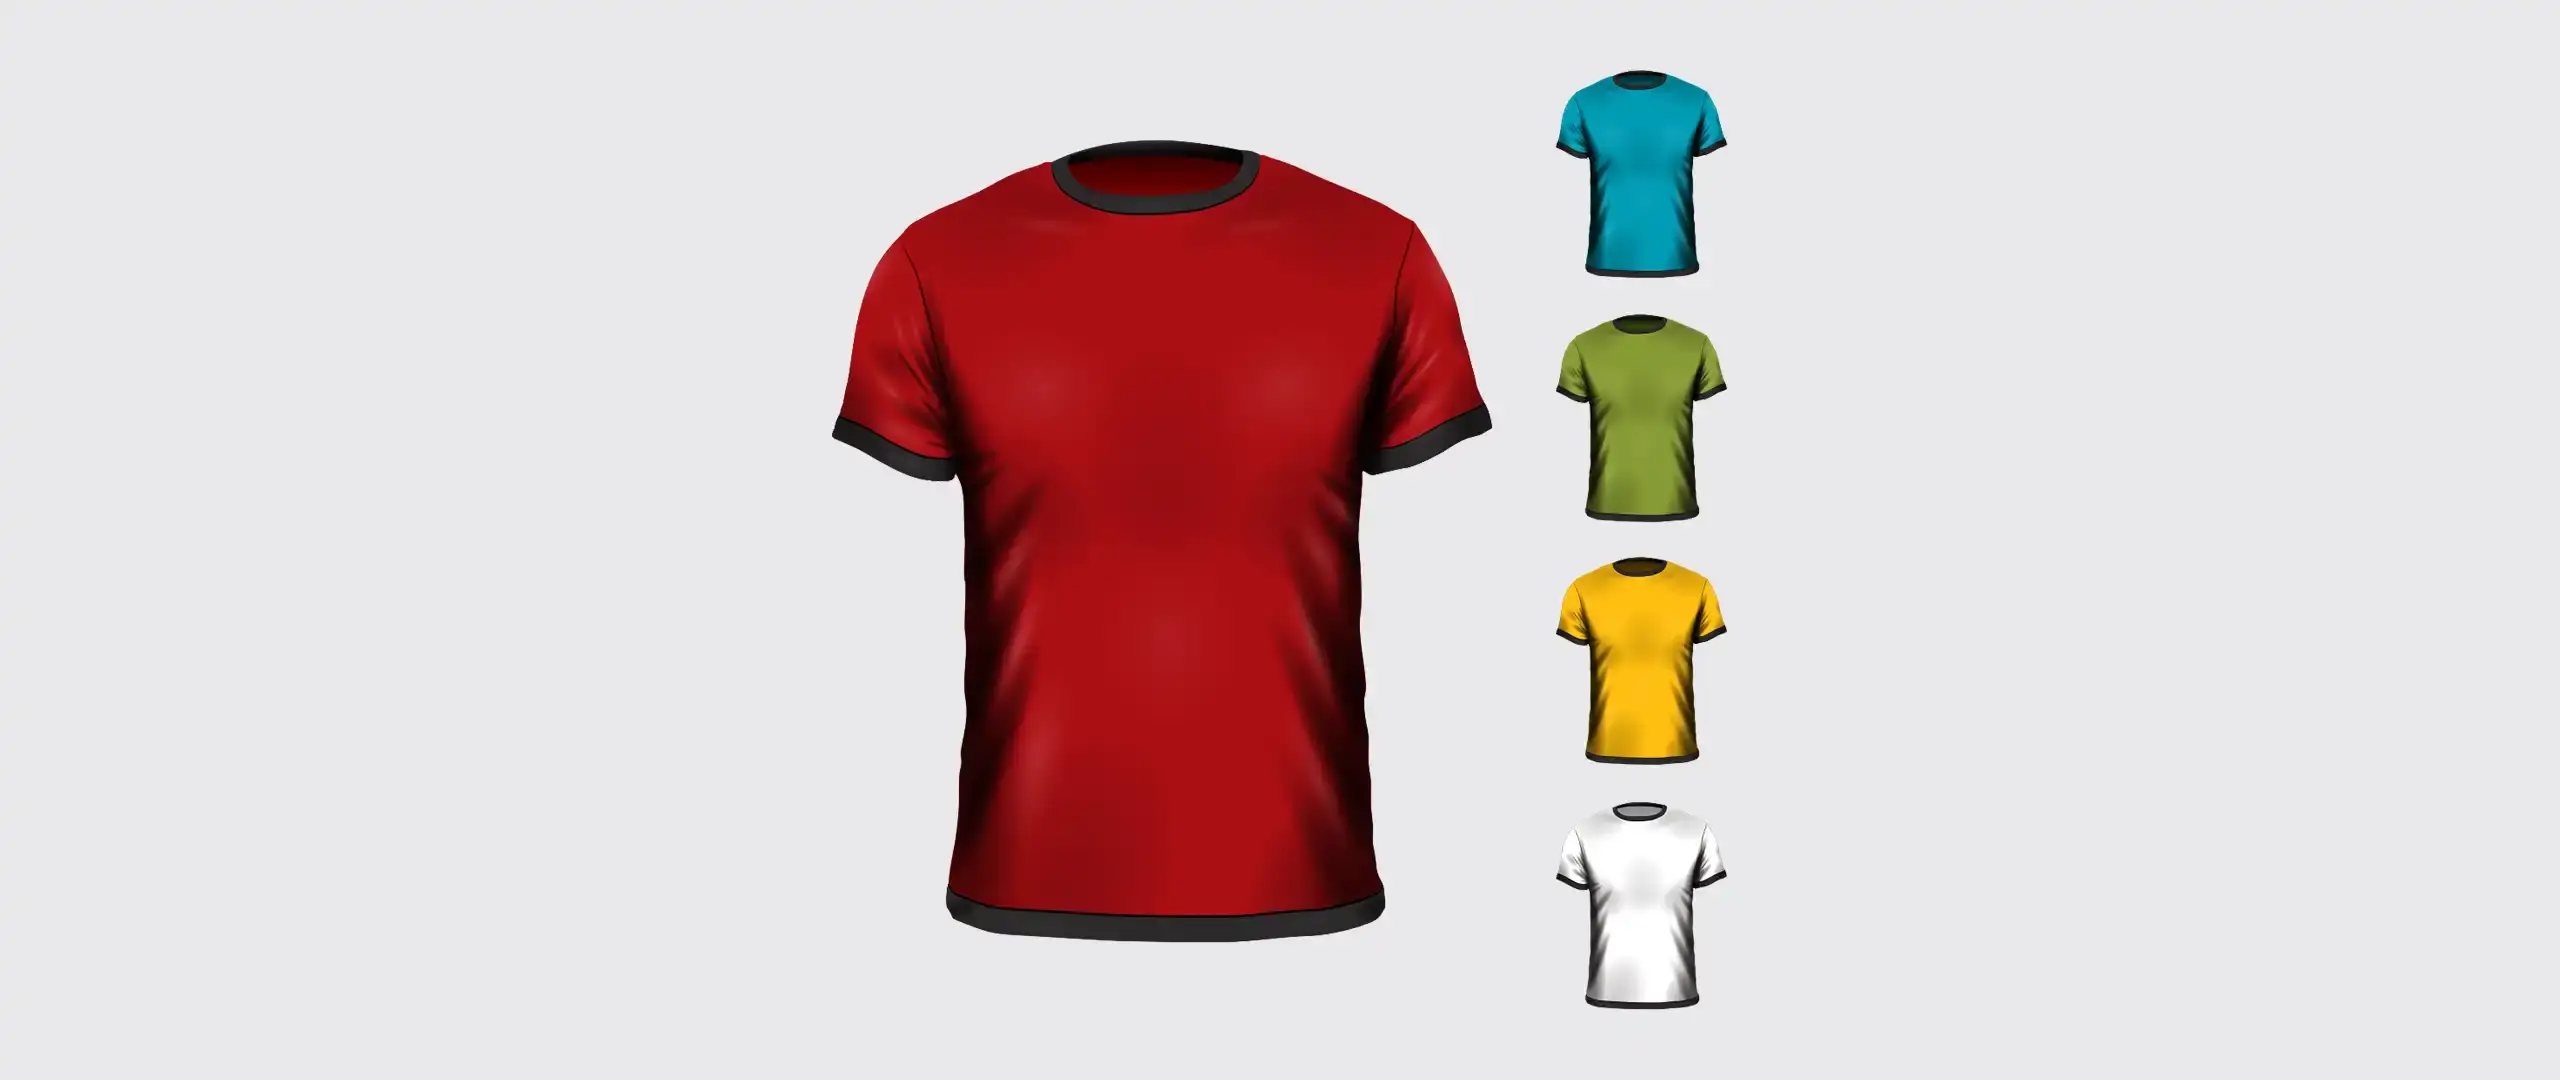 Popular T-Shirt Colors To Sell This Year